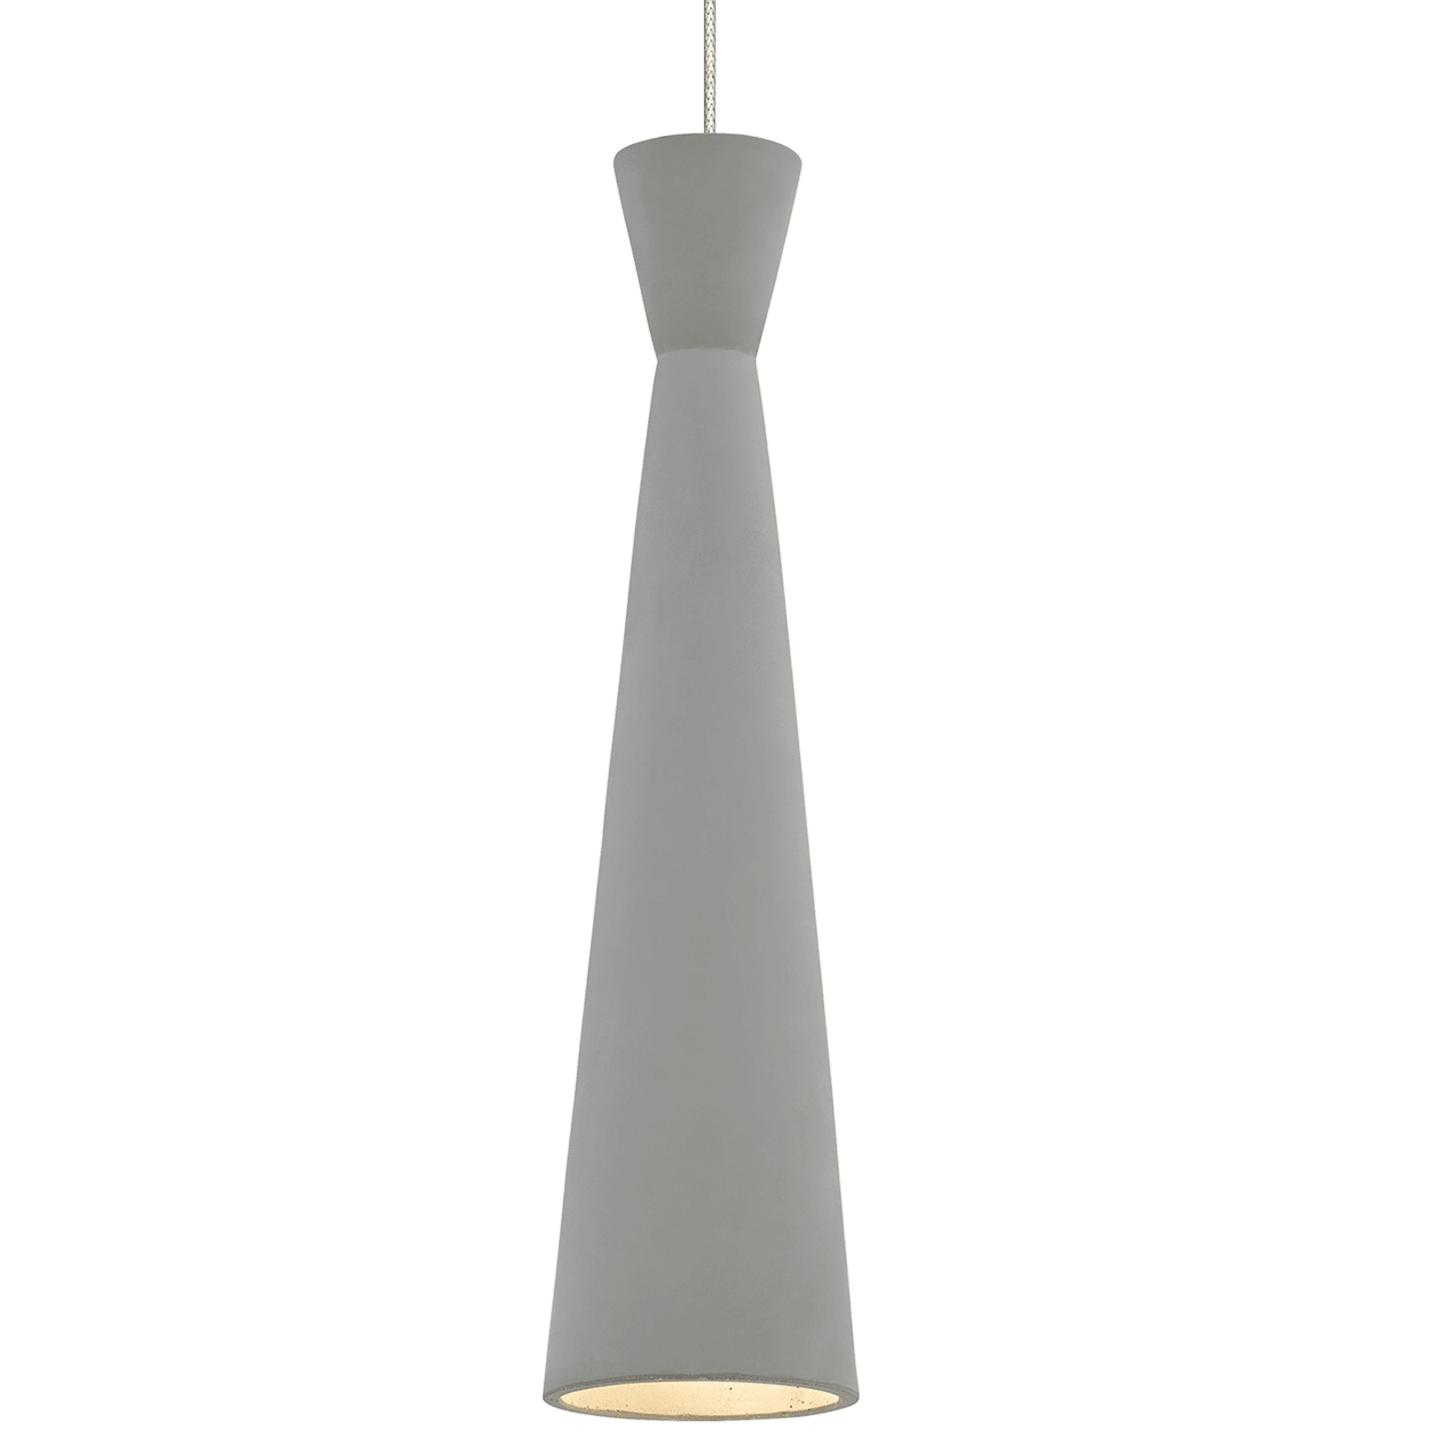 Satin Nickel Concrete Lamp Not Included